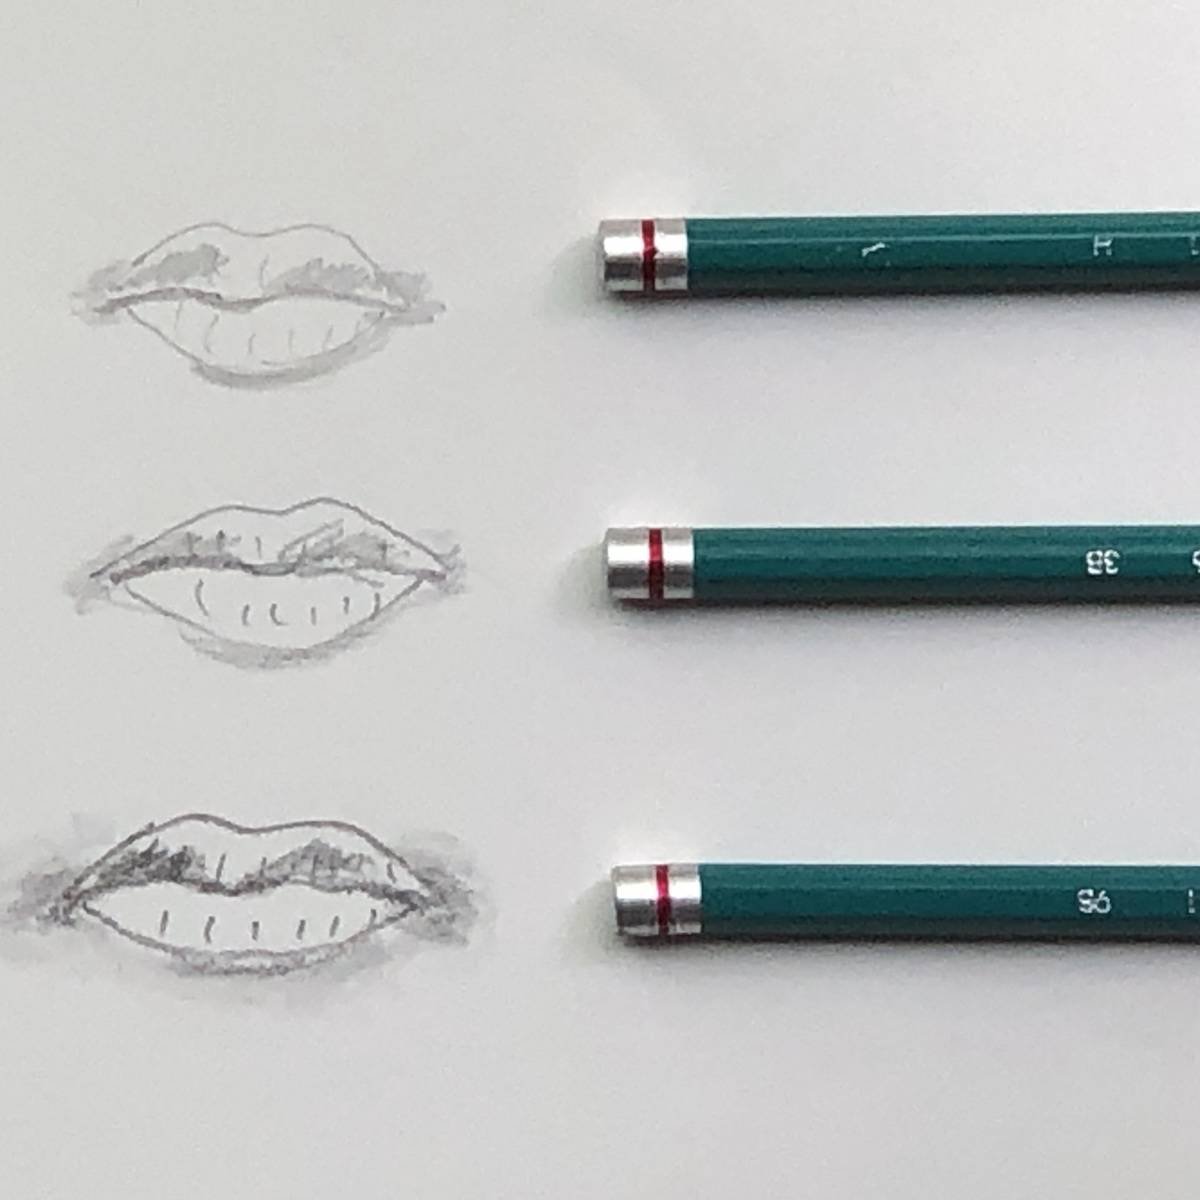 Lips drawn with different types of drawing pencils.